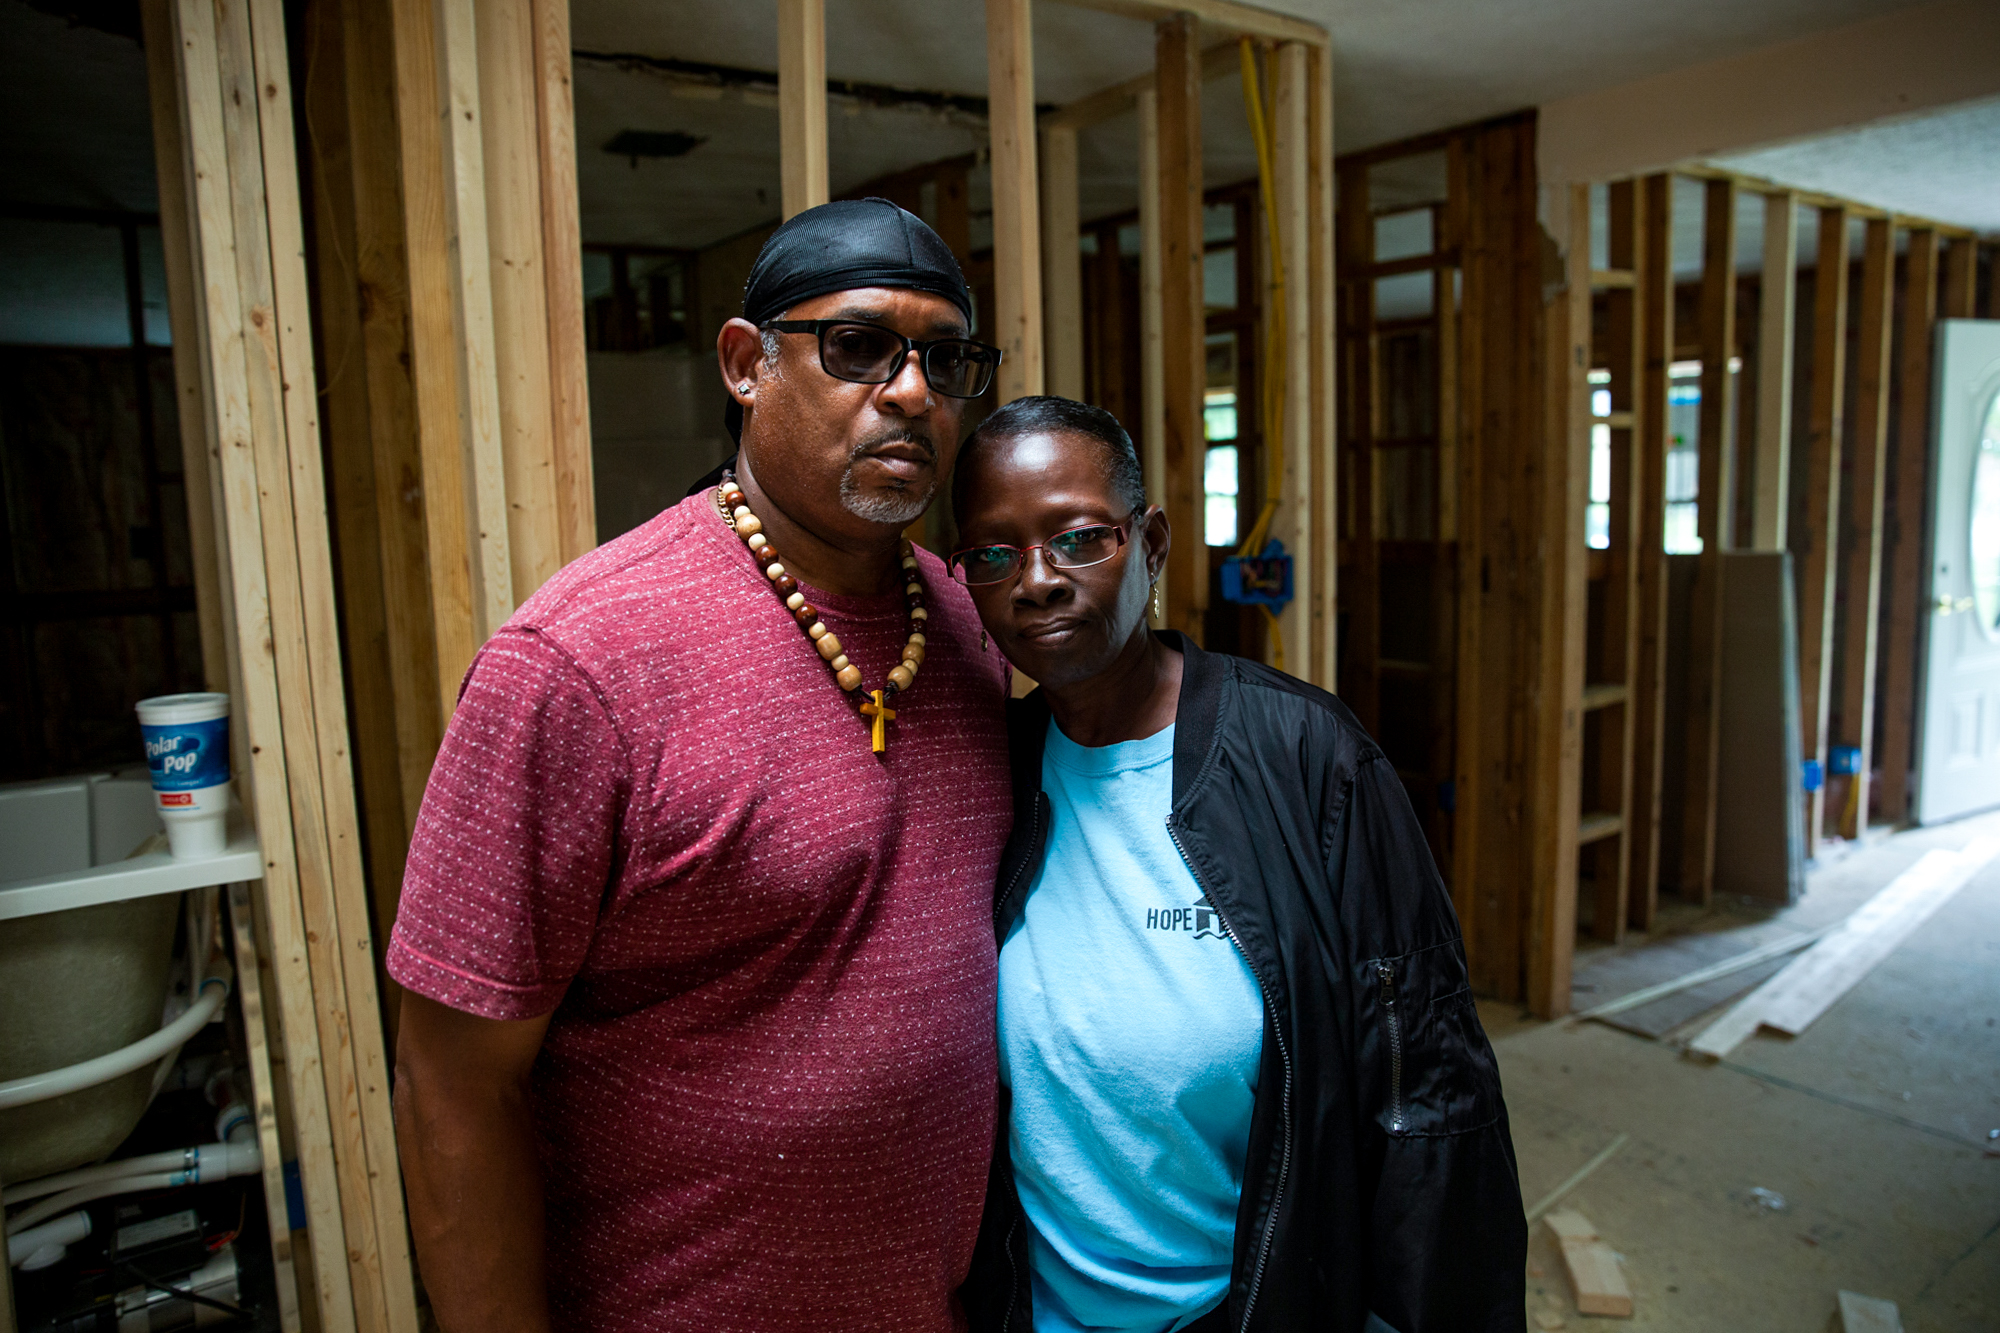 Lloyd and Regina Evans - Lloyd and Regina Evans of Spring Lake, North Carolina, struggled to get federal and state aid to repair their home after Hurricane Florence. They've had to put every penny back into the project. “Right now, I just go to get home,” Regina said. (Harrison Mantas/News21)